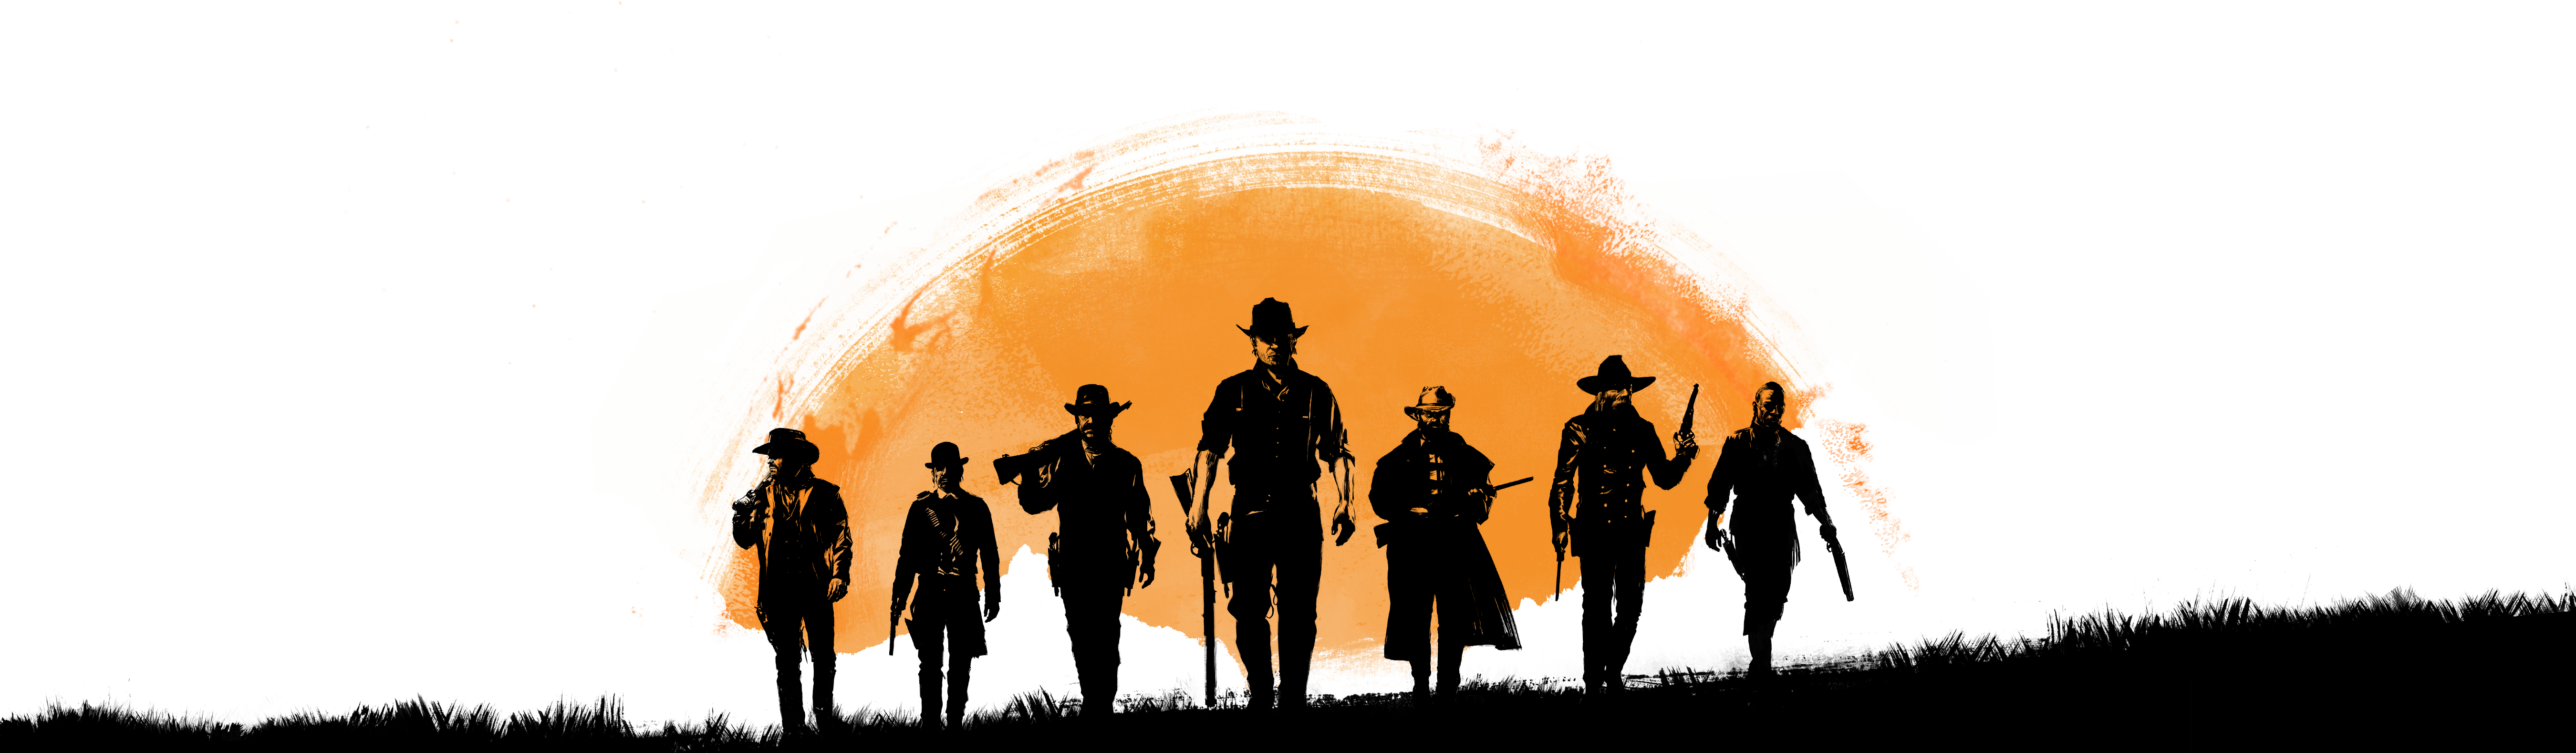 Red Dead Redemption II Background PNG